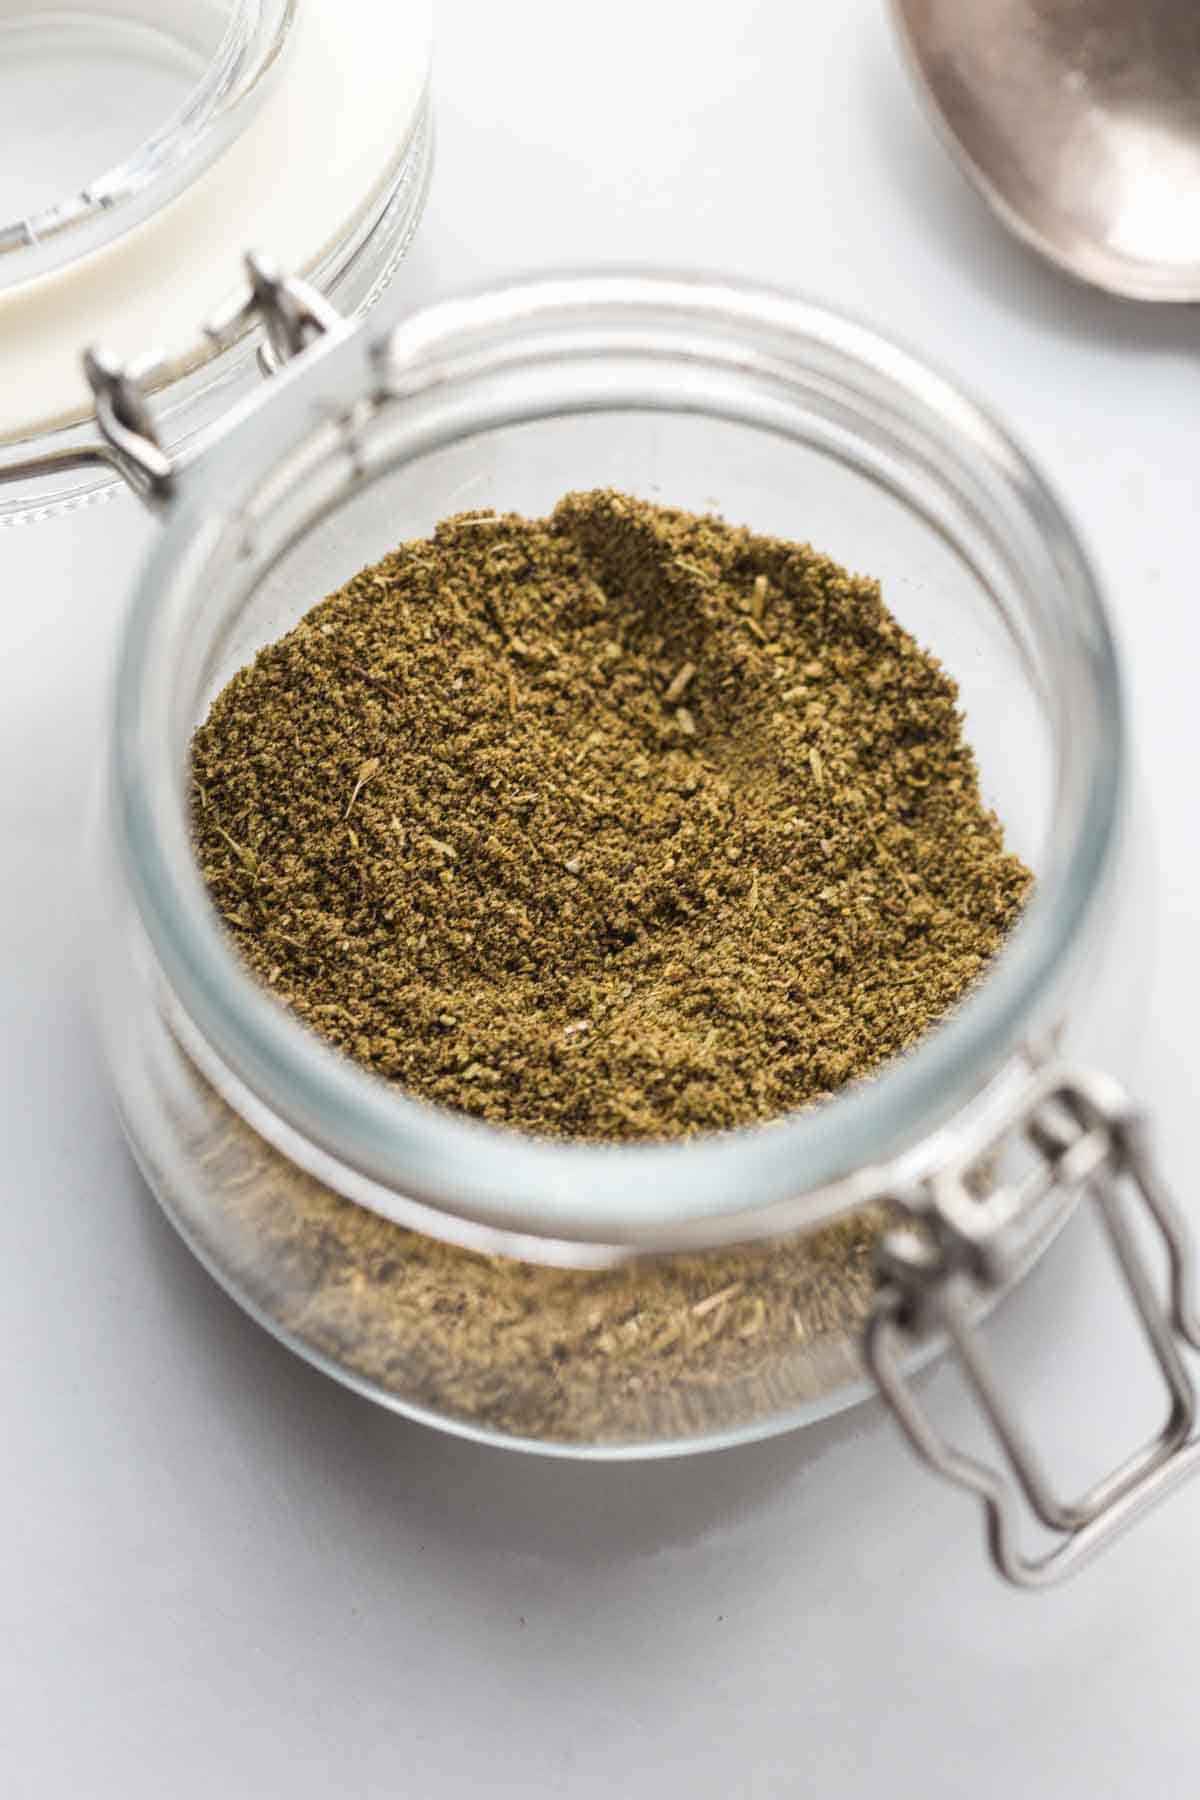 Ground Poultry Seasoning stored in a glass jar